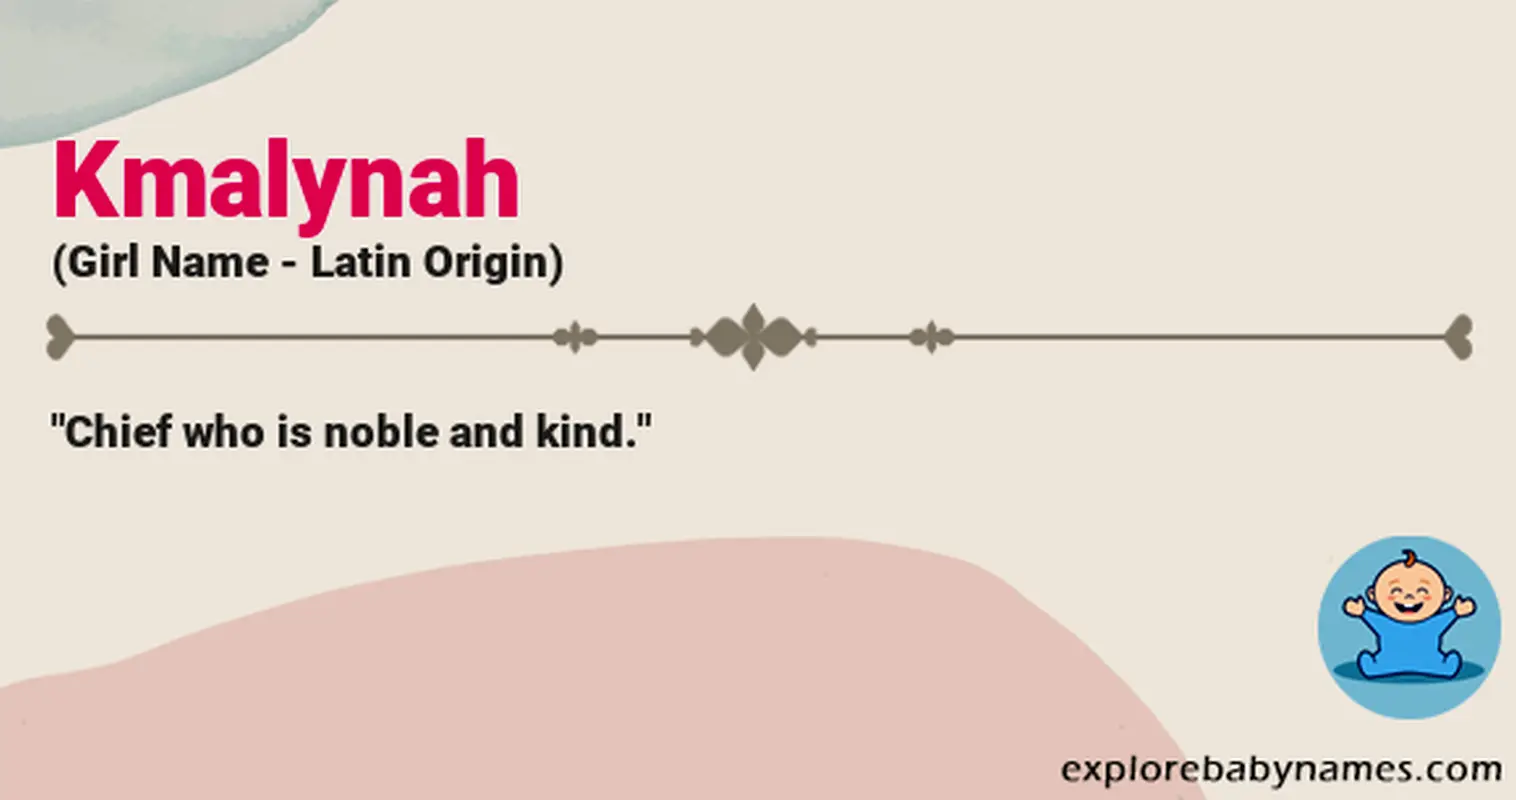 Meaning of Kmalynah